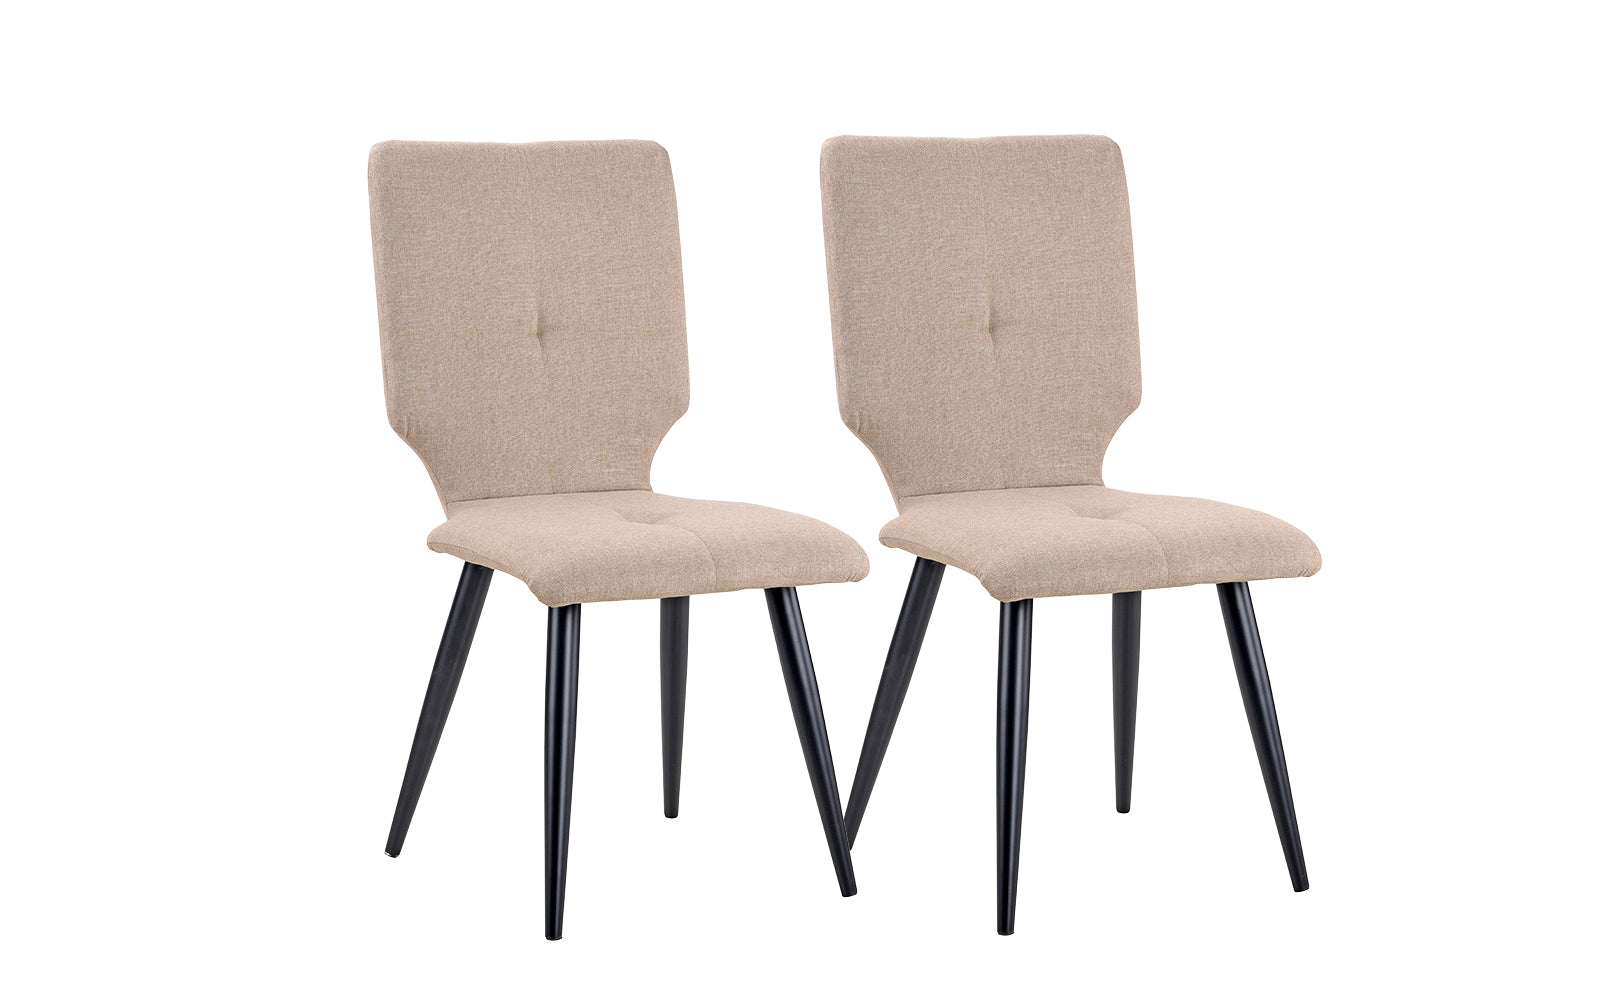 Ava Set of (2) Modern Upholstered Dining Chairs